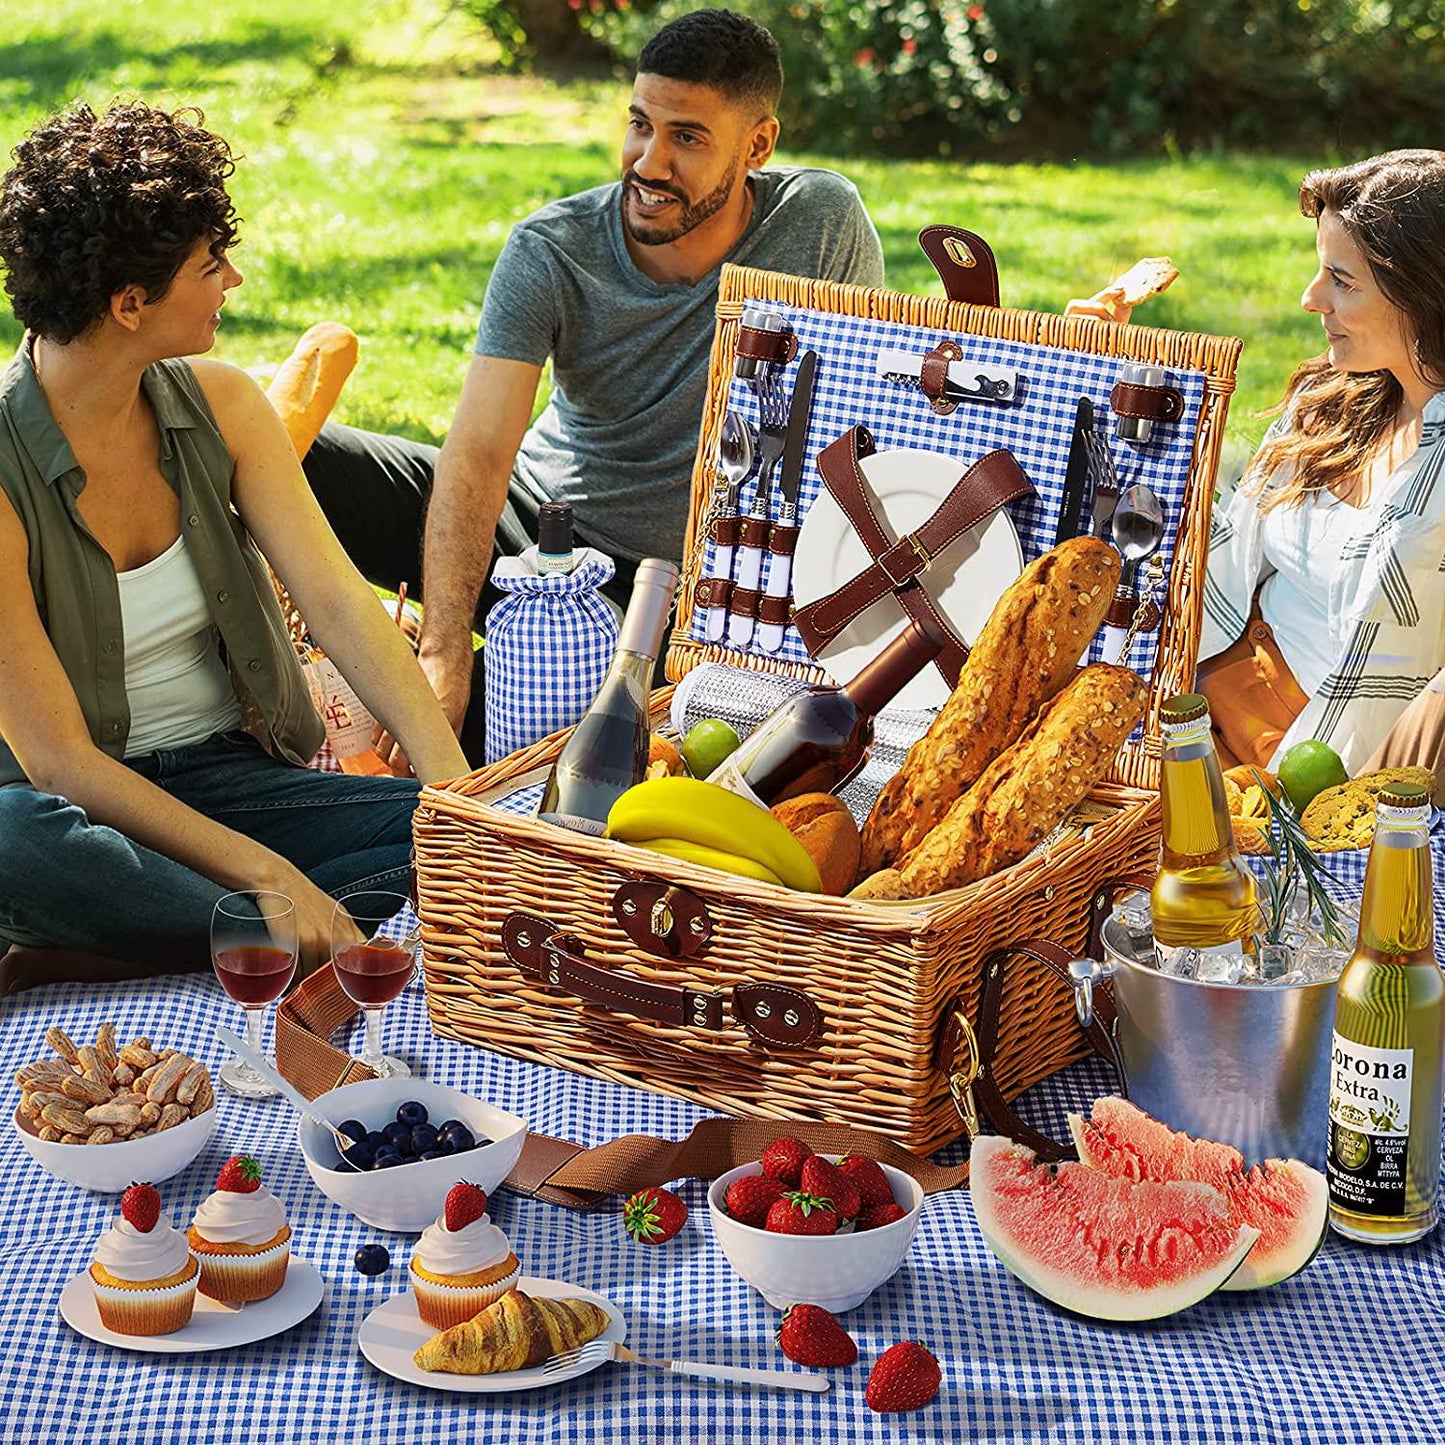 Greenstell Wicker Picnic Basket Sets for 4 Persons with High Sealing Insulation Layer,Waterproof Picnic Mat, Removable Strap and Wine Bag